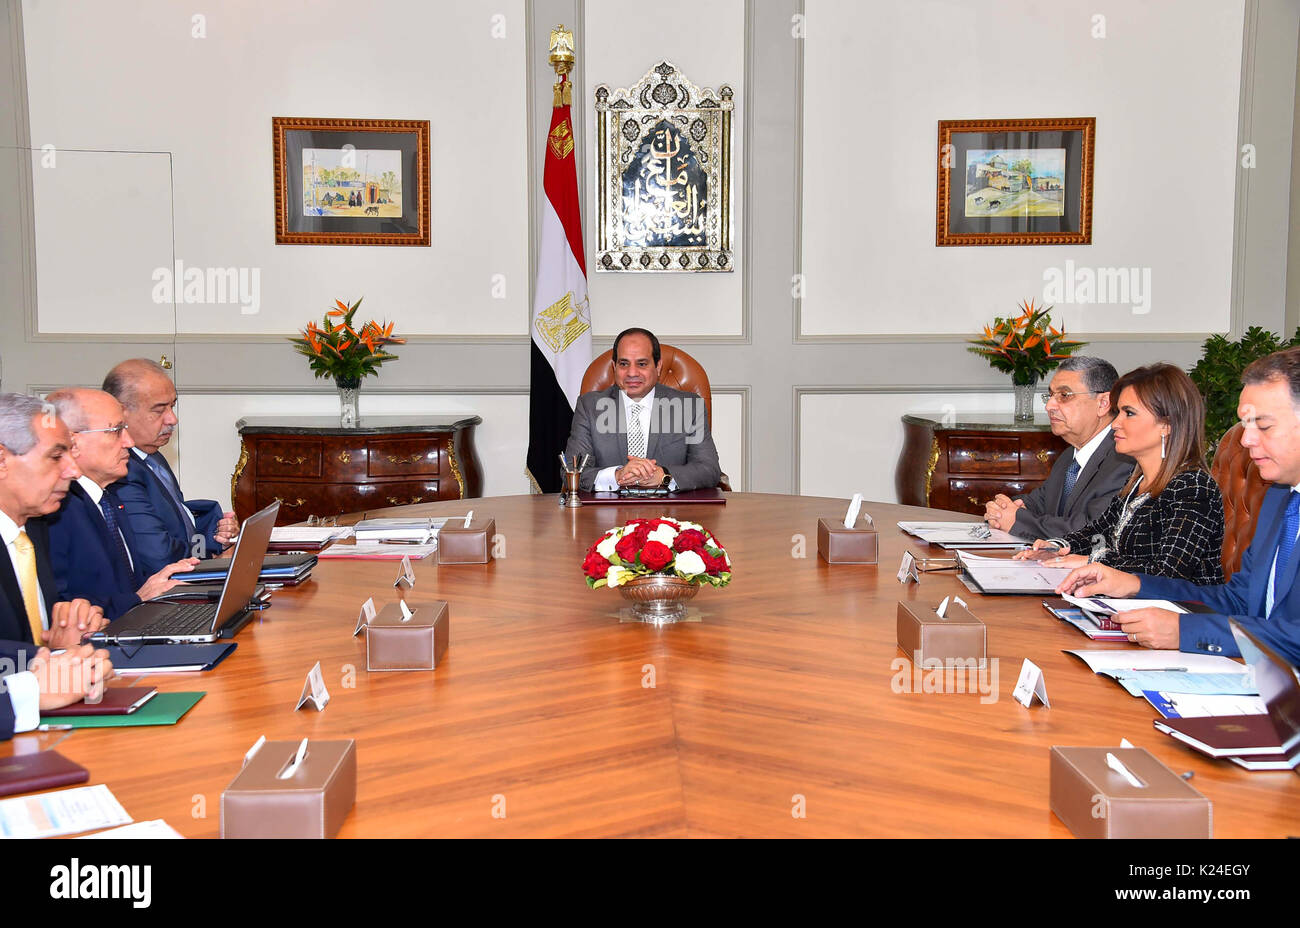 Cairo, Egypt. 28th Aug, 2017. Egyptian President Abdel Fattah al-Sisi meets with Prime Minister Sherif Ismail, in Cairo, Egypt, on August 28, 2017 Credit: Egyptian President Office/APA Images/ZUMA Wire/Alamy Live News Stock Photo